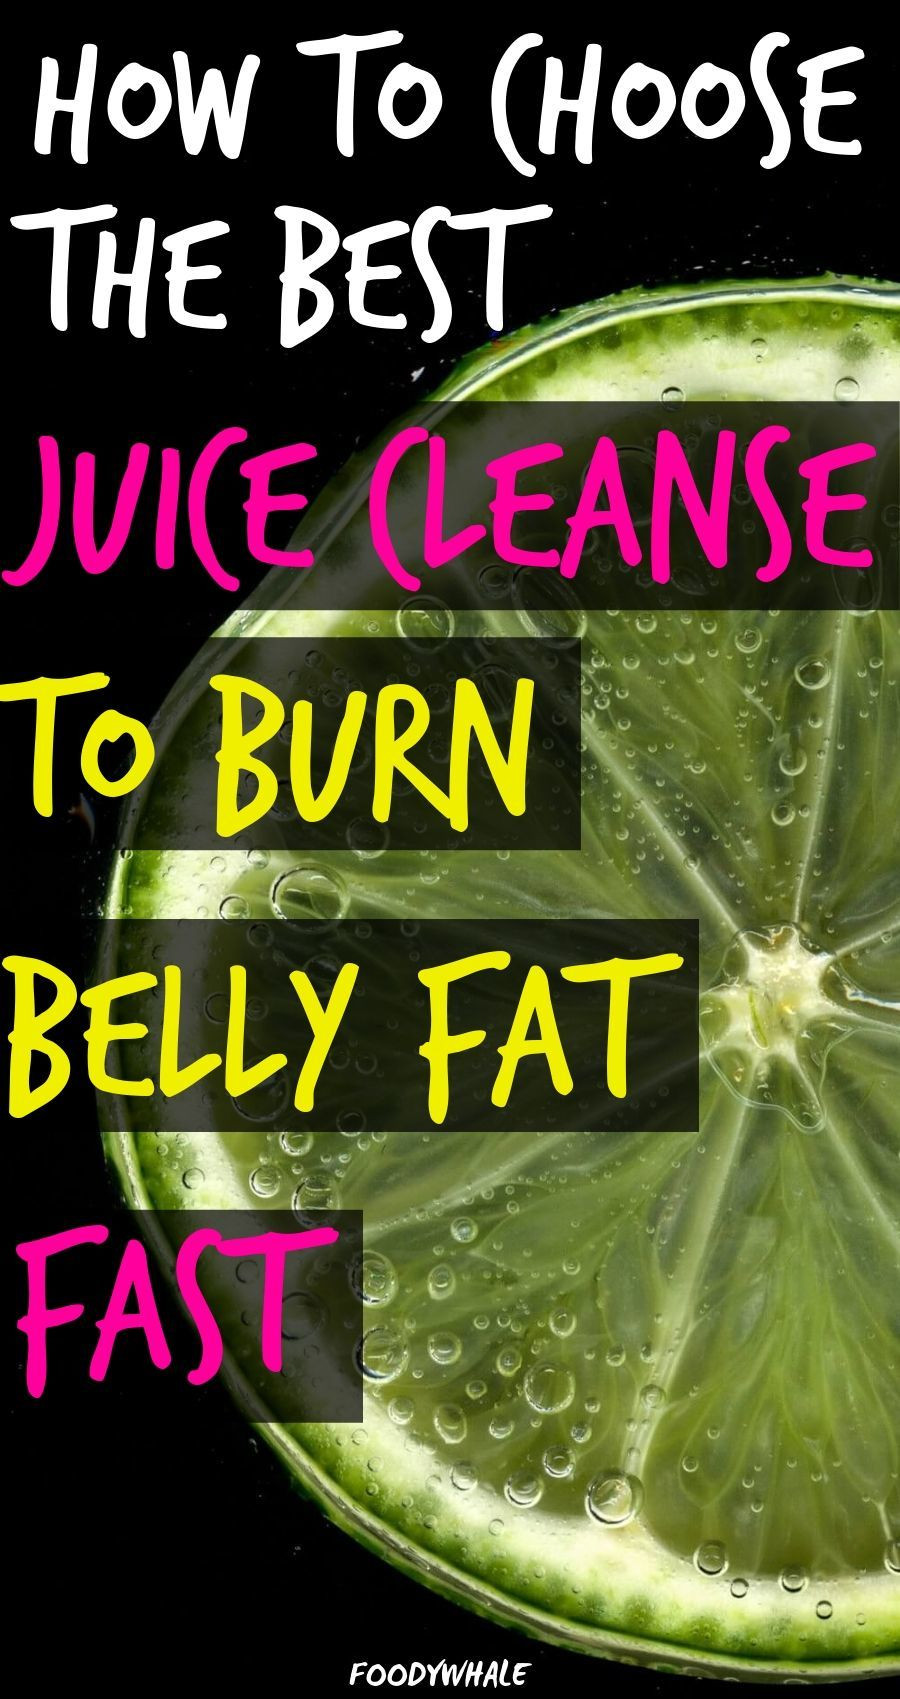 Burn Belly Fat Juice
 How To Choose The Best Juice Cleanse To Burn Belly Fat